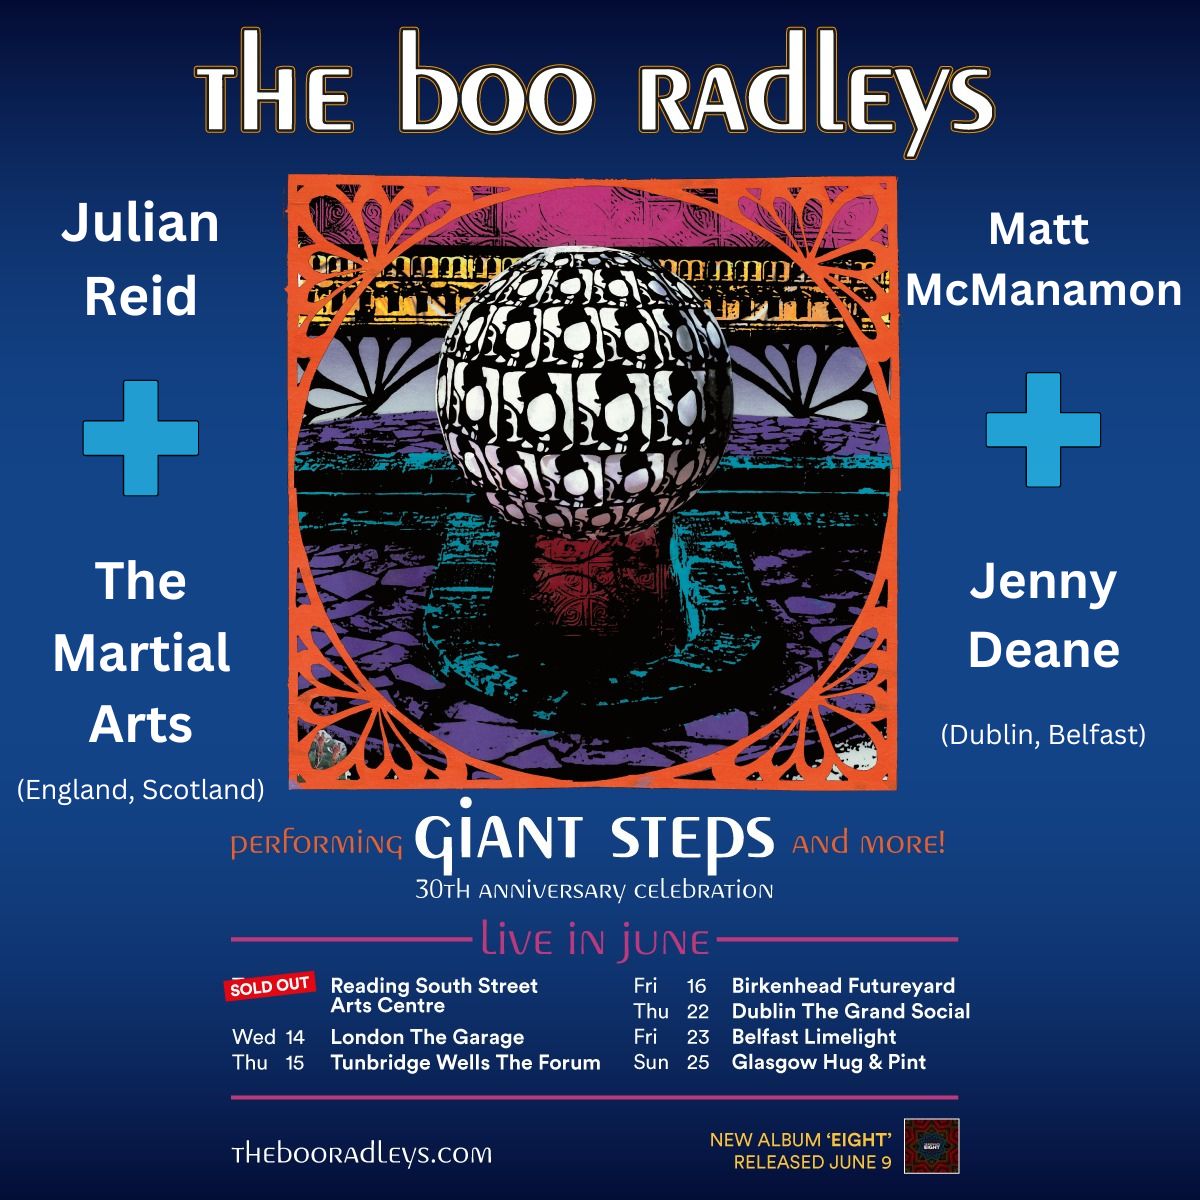 Delighted to announce that I will be supporting @theboo_radleys on the English and Scottish dates of their upcoming ‘Giant Steps’ 30th Anniversary tour of the UK and Ireland. I'll be performing a short acoustic set and can't wait to hit the road with my guitar. My old friend…